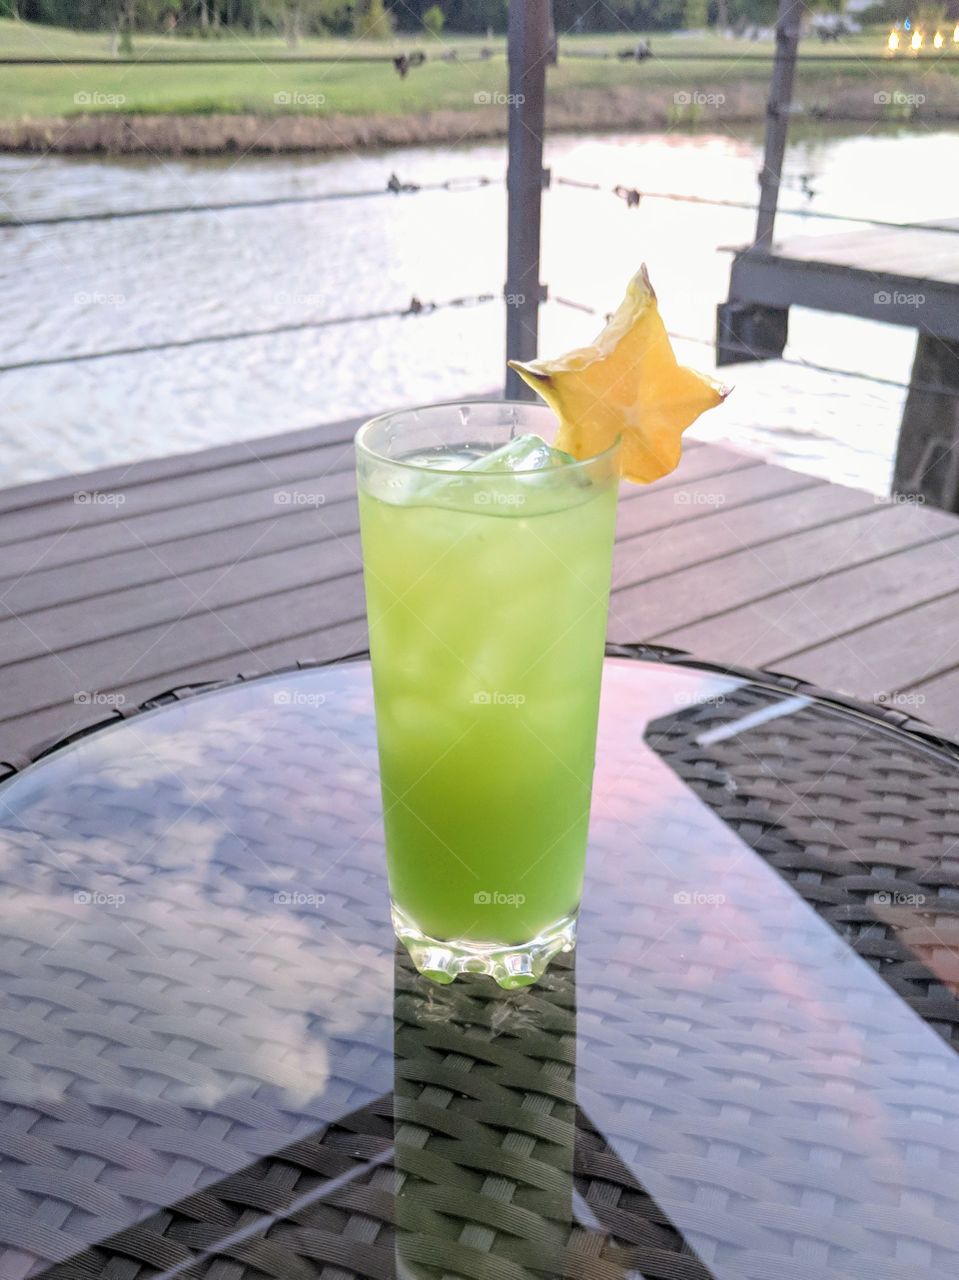 Green cocktail with star fruit garnish